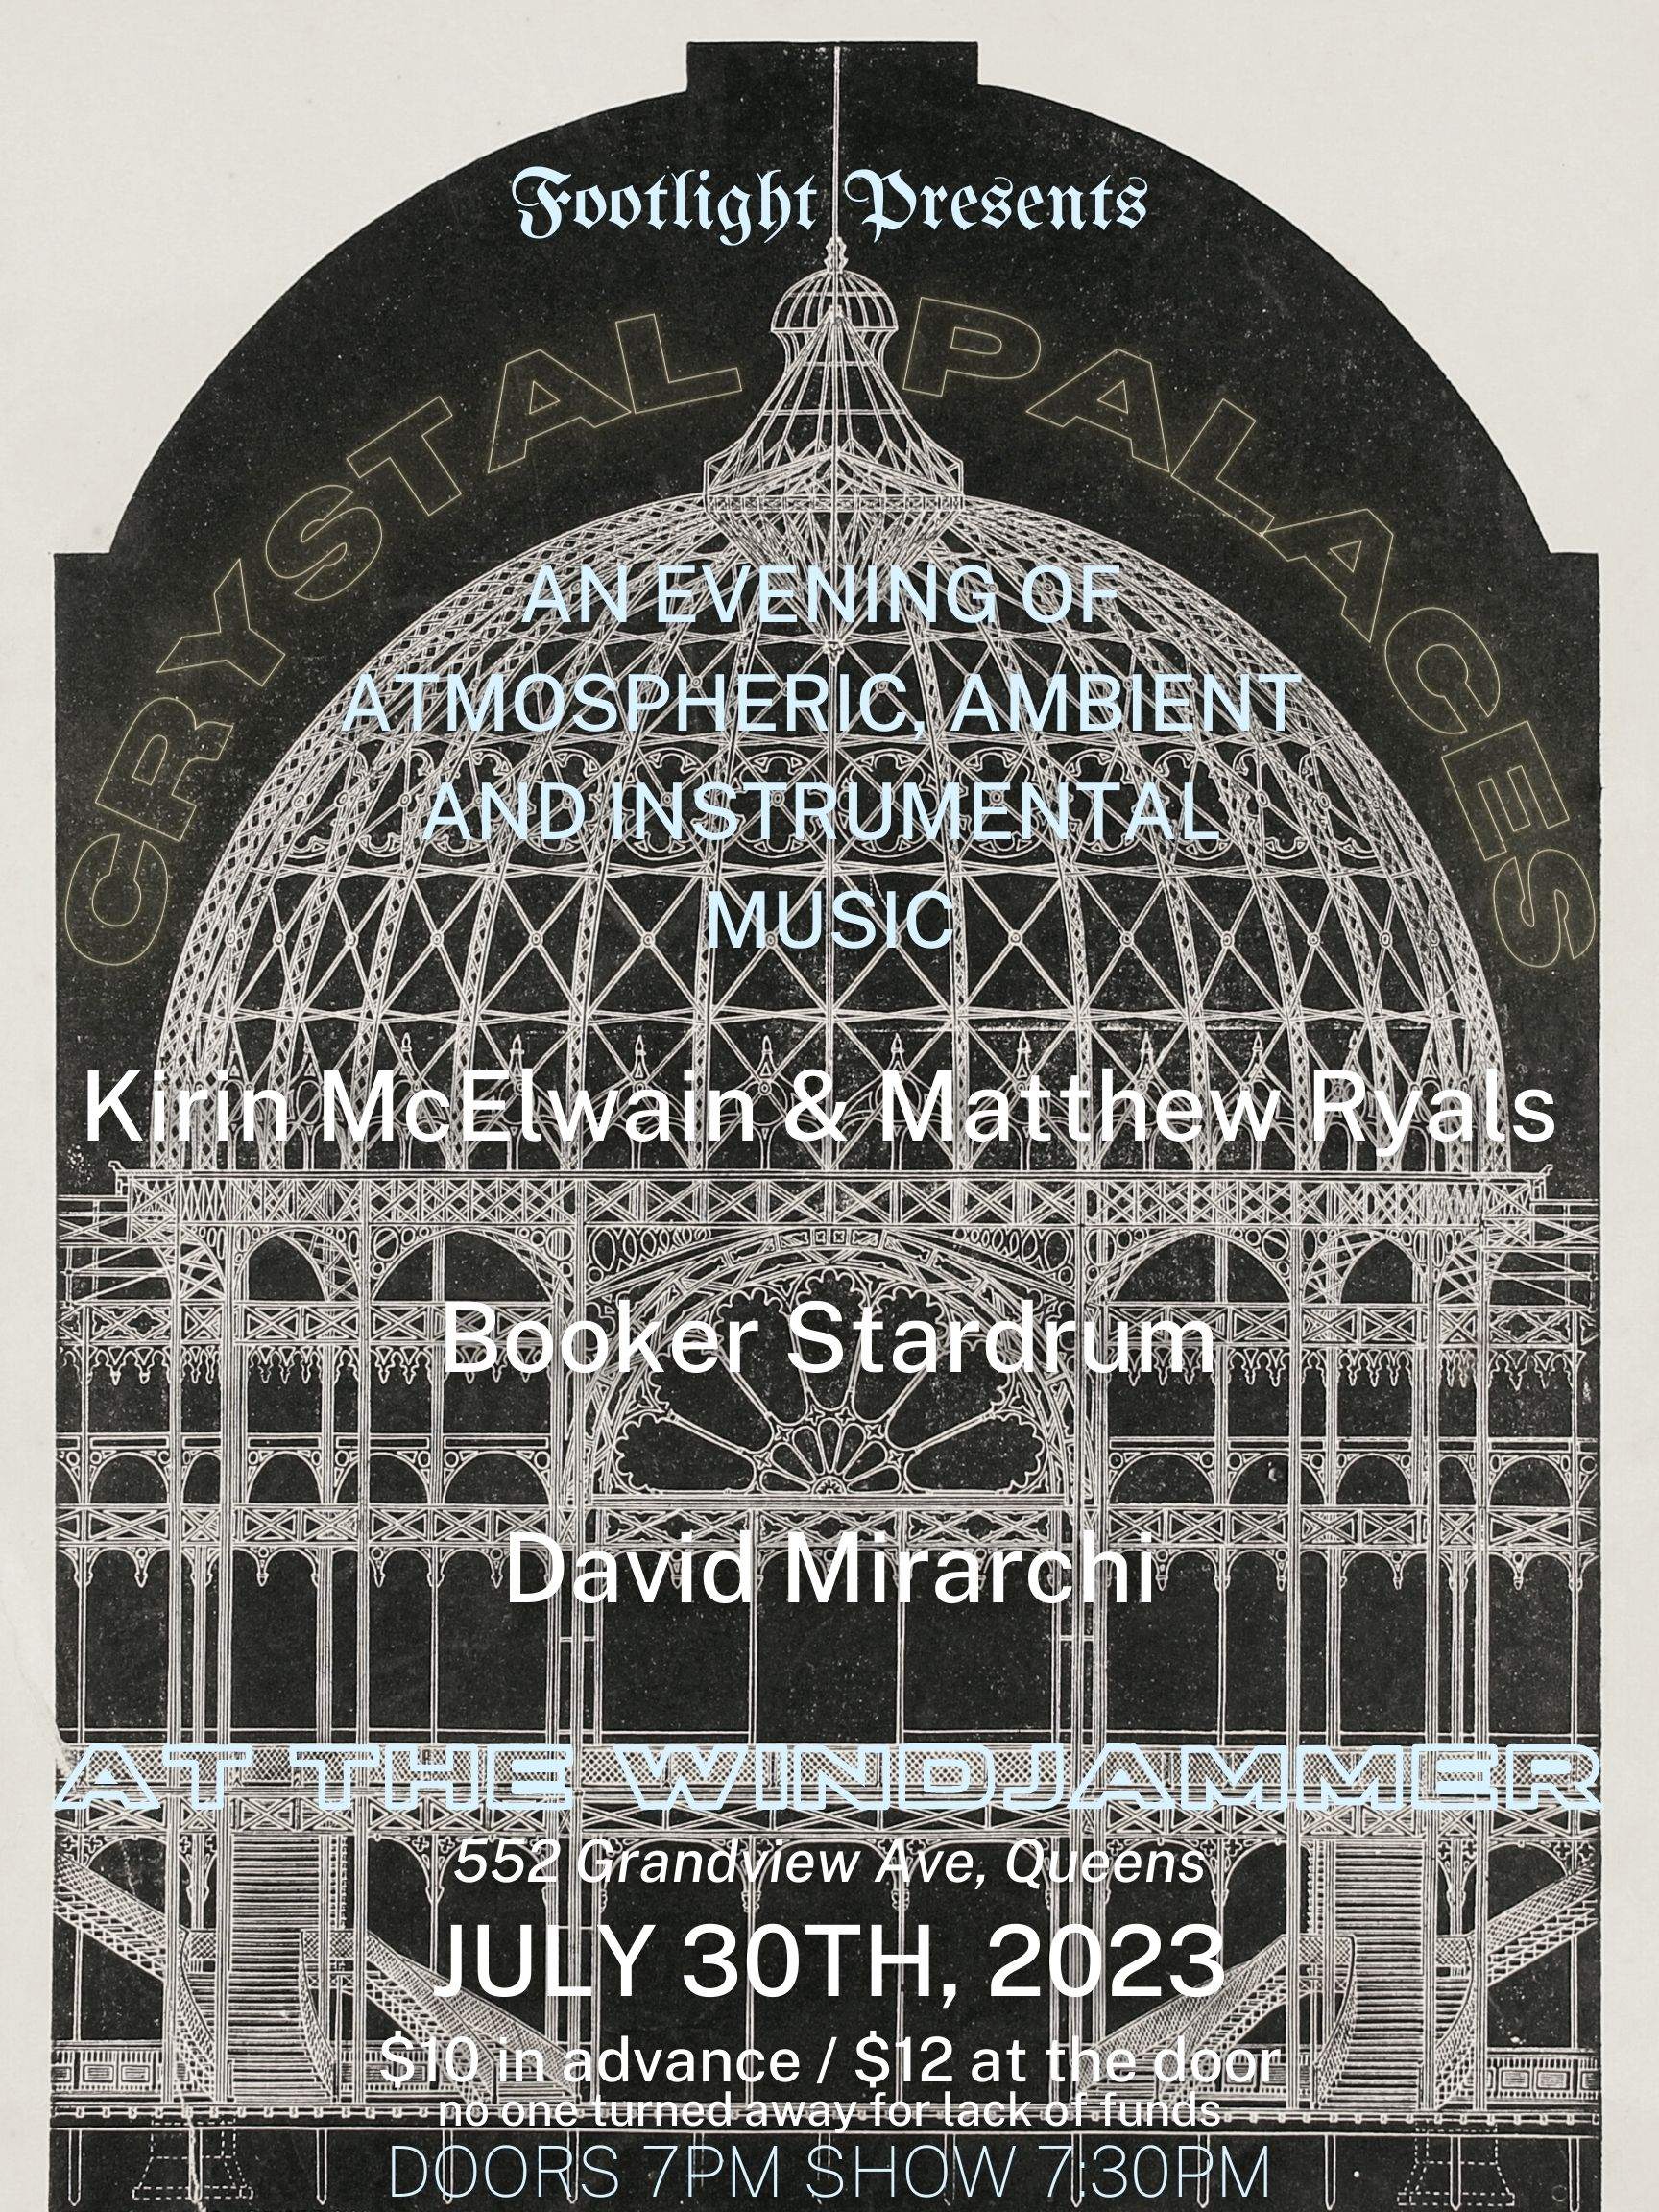 Crystal Palaces: Crystal Palaces, An Evening of Atmospheric, Ambient and Instrumental Music - Página frontal